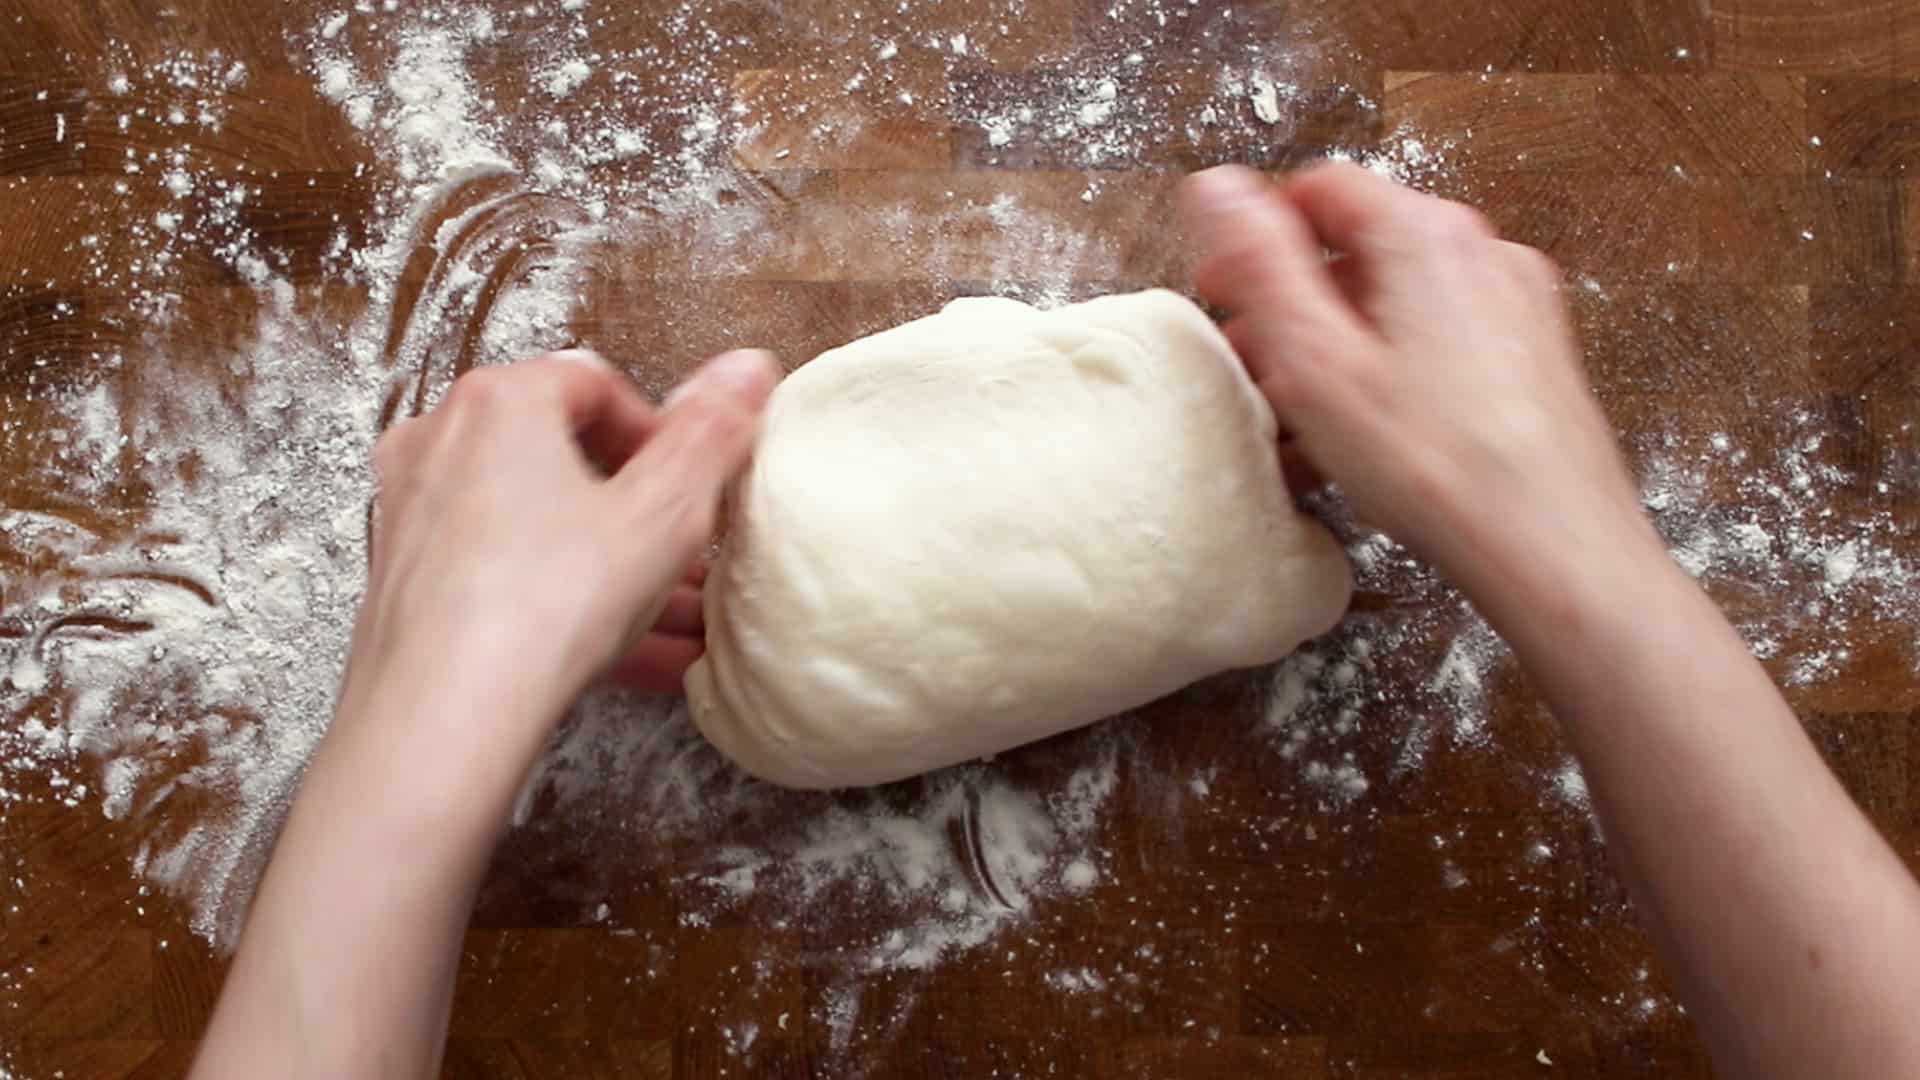 Flipping the dough upside down